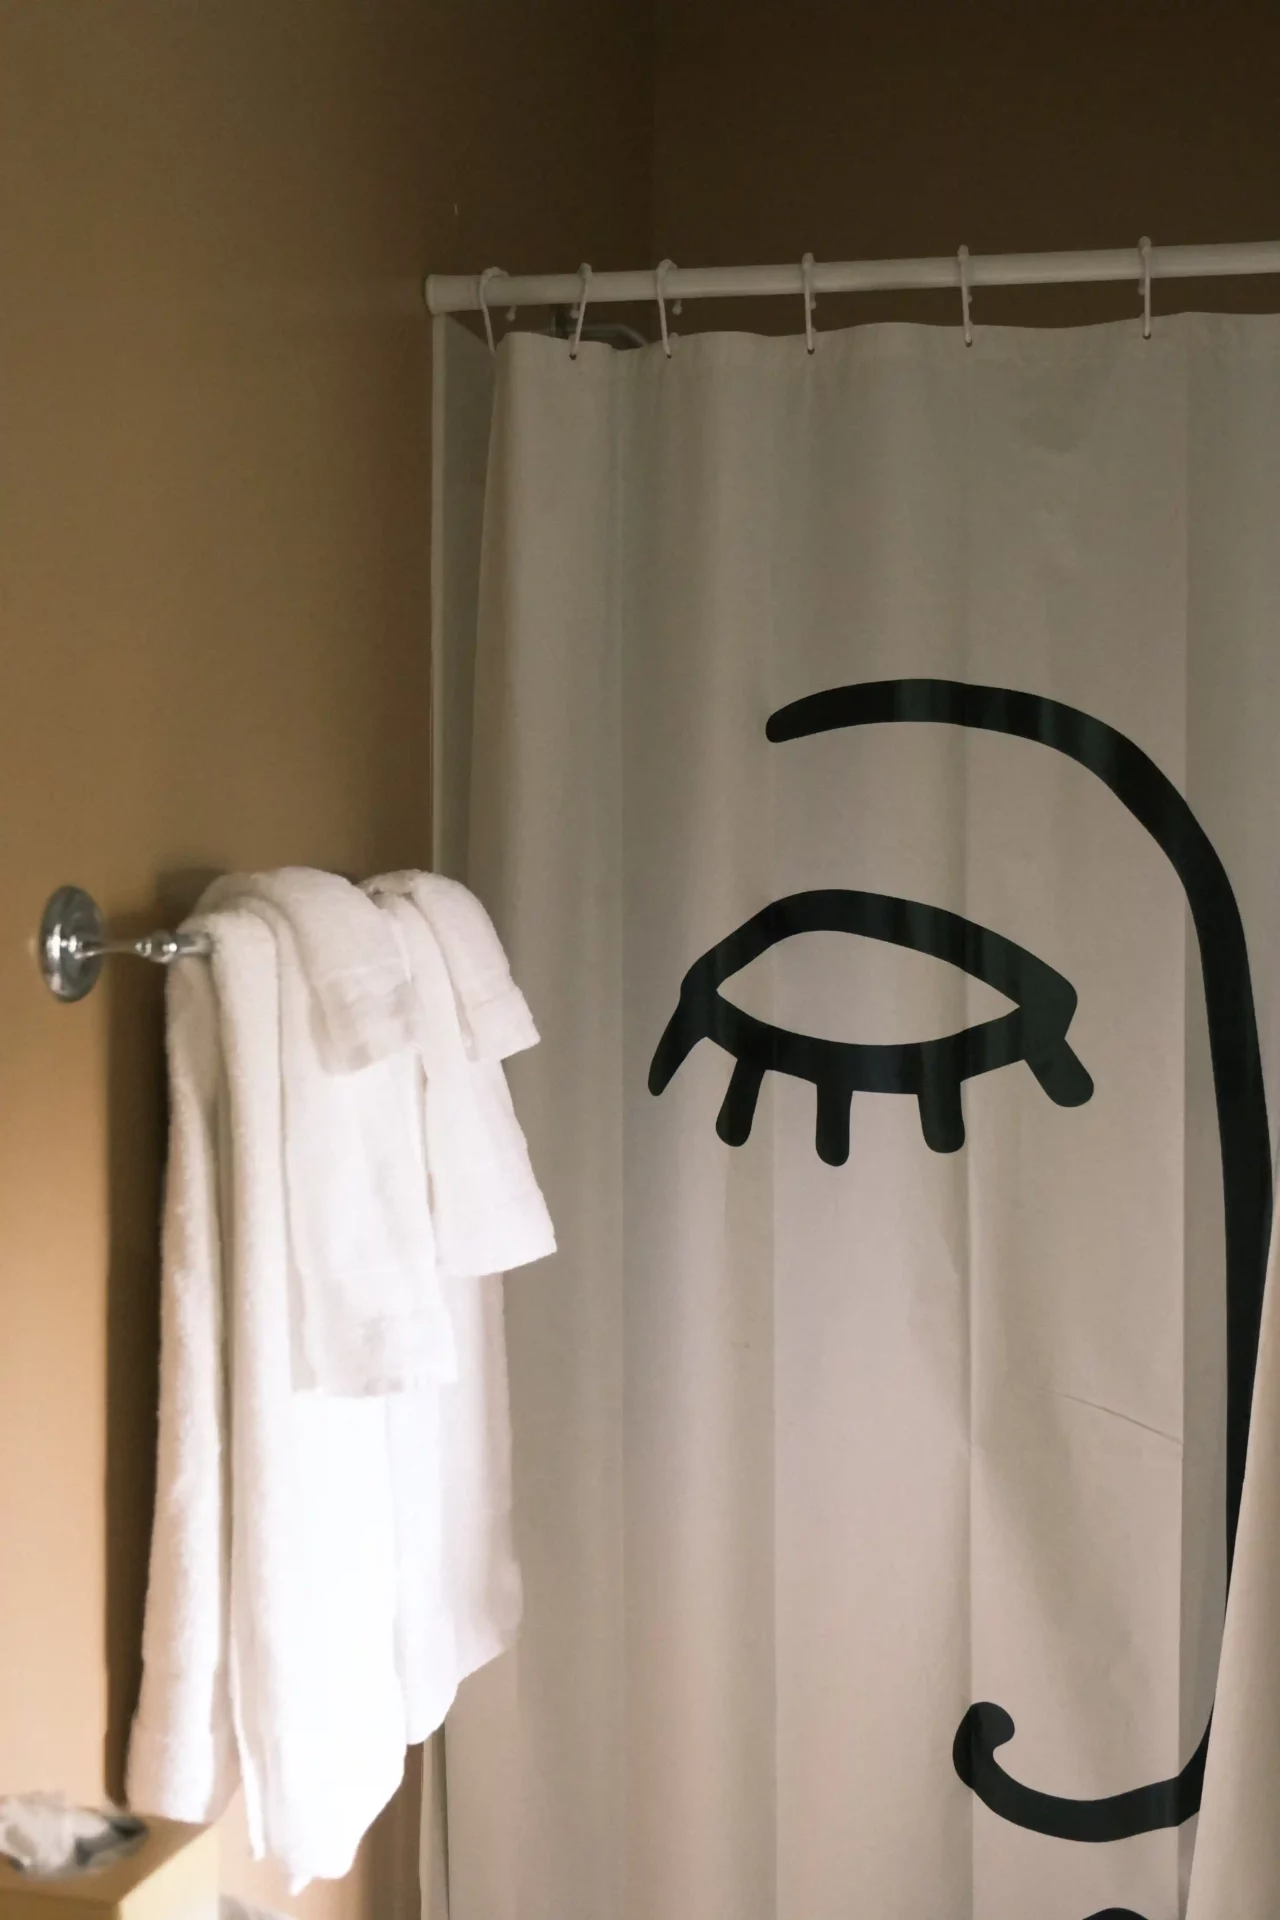 A bathroom with a shower curtain in an abstract style, whose hooks slide smoothly.